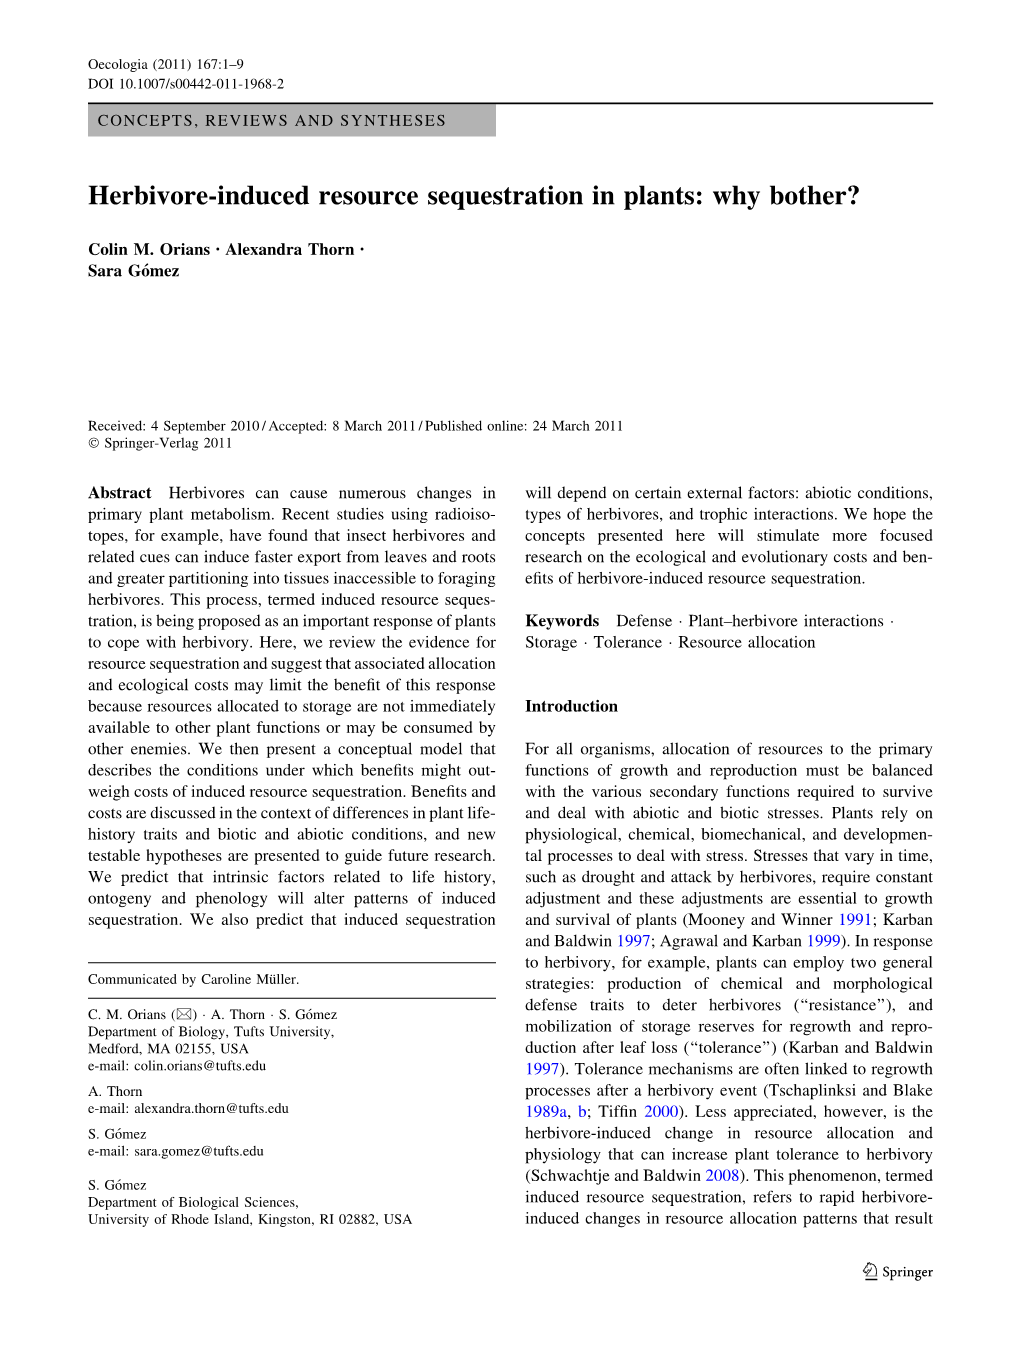 Herbivore-Induced Resource Sequestration in Plants: Why Bother?